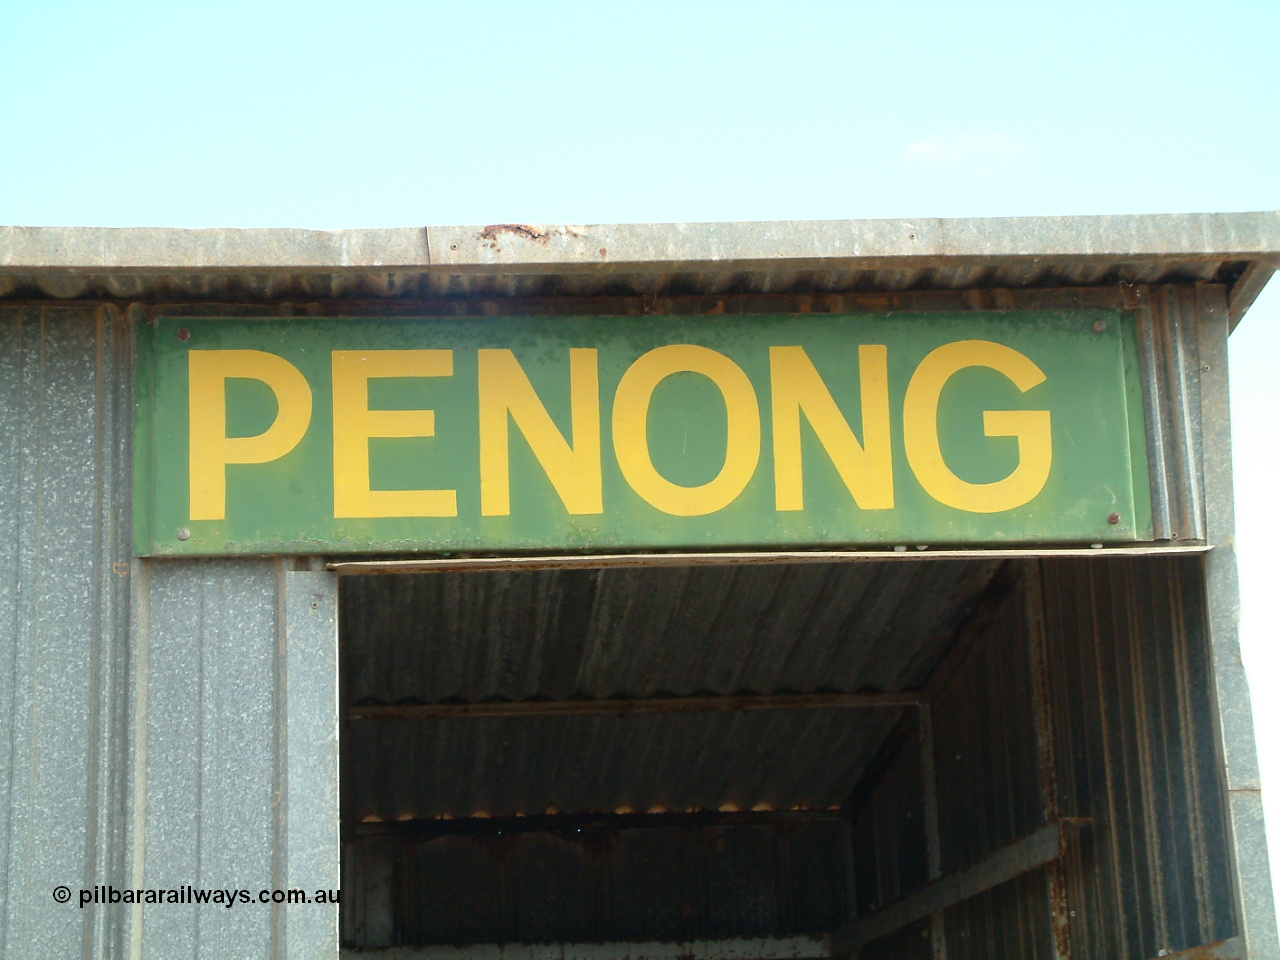 030414 154434
Penong station name board on shelter shed. , last train in March 1997.
